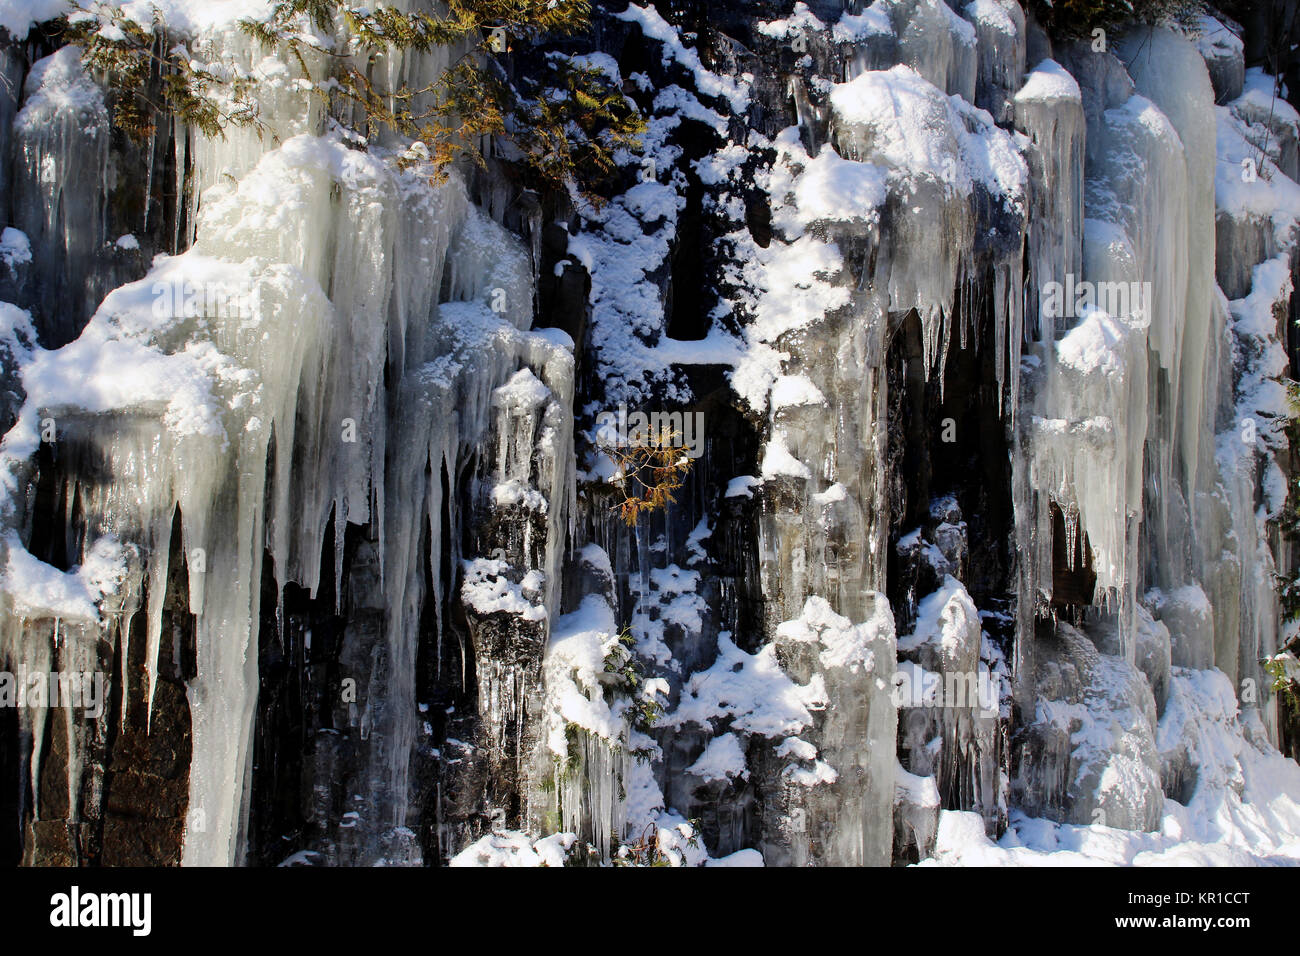 Icicles formation Stock Photo